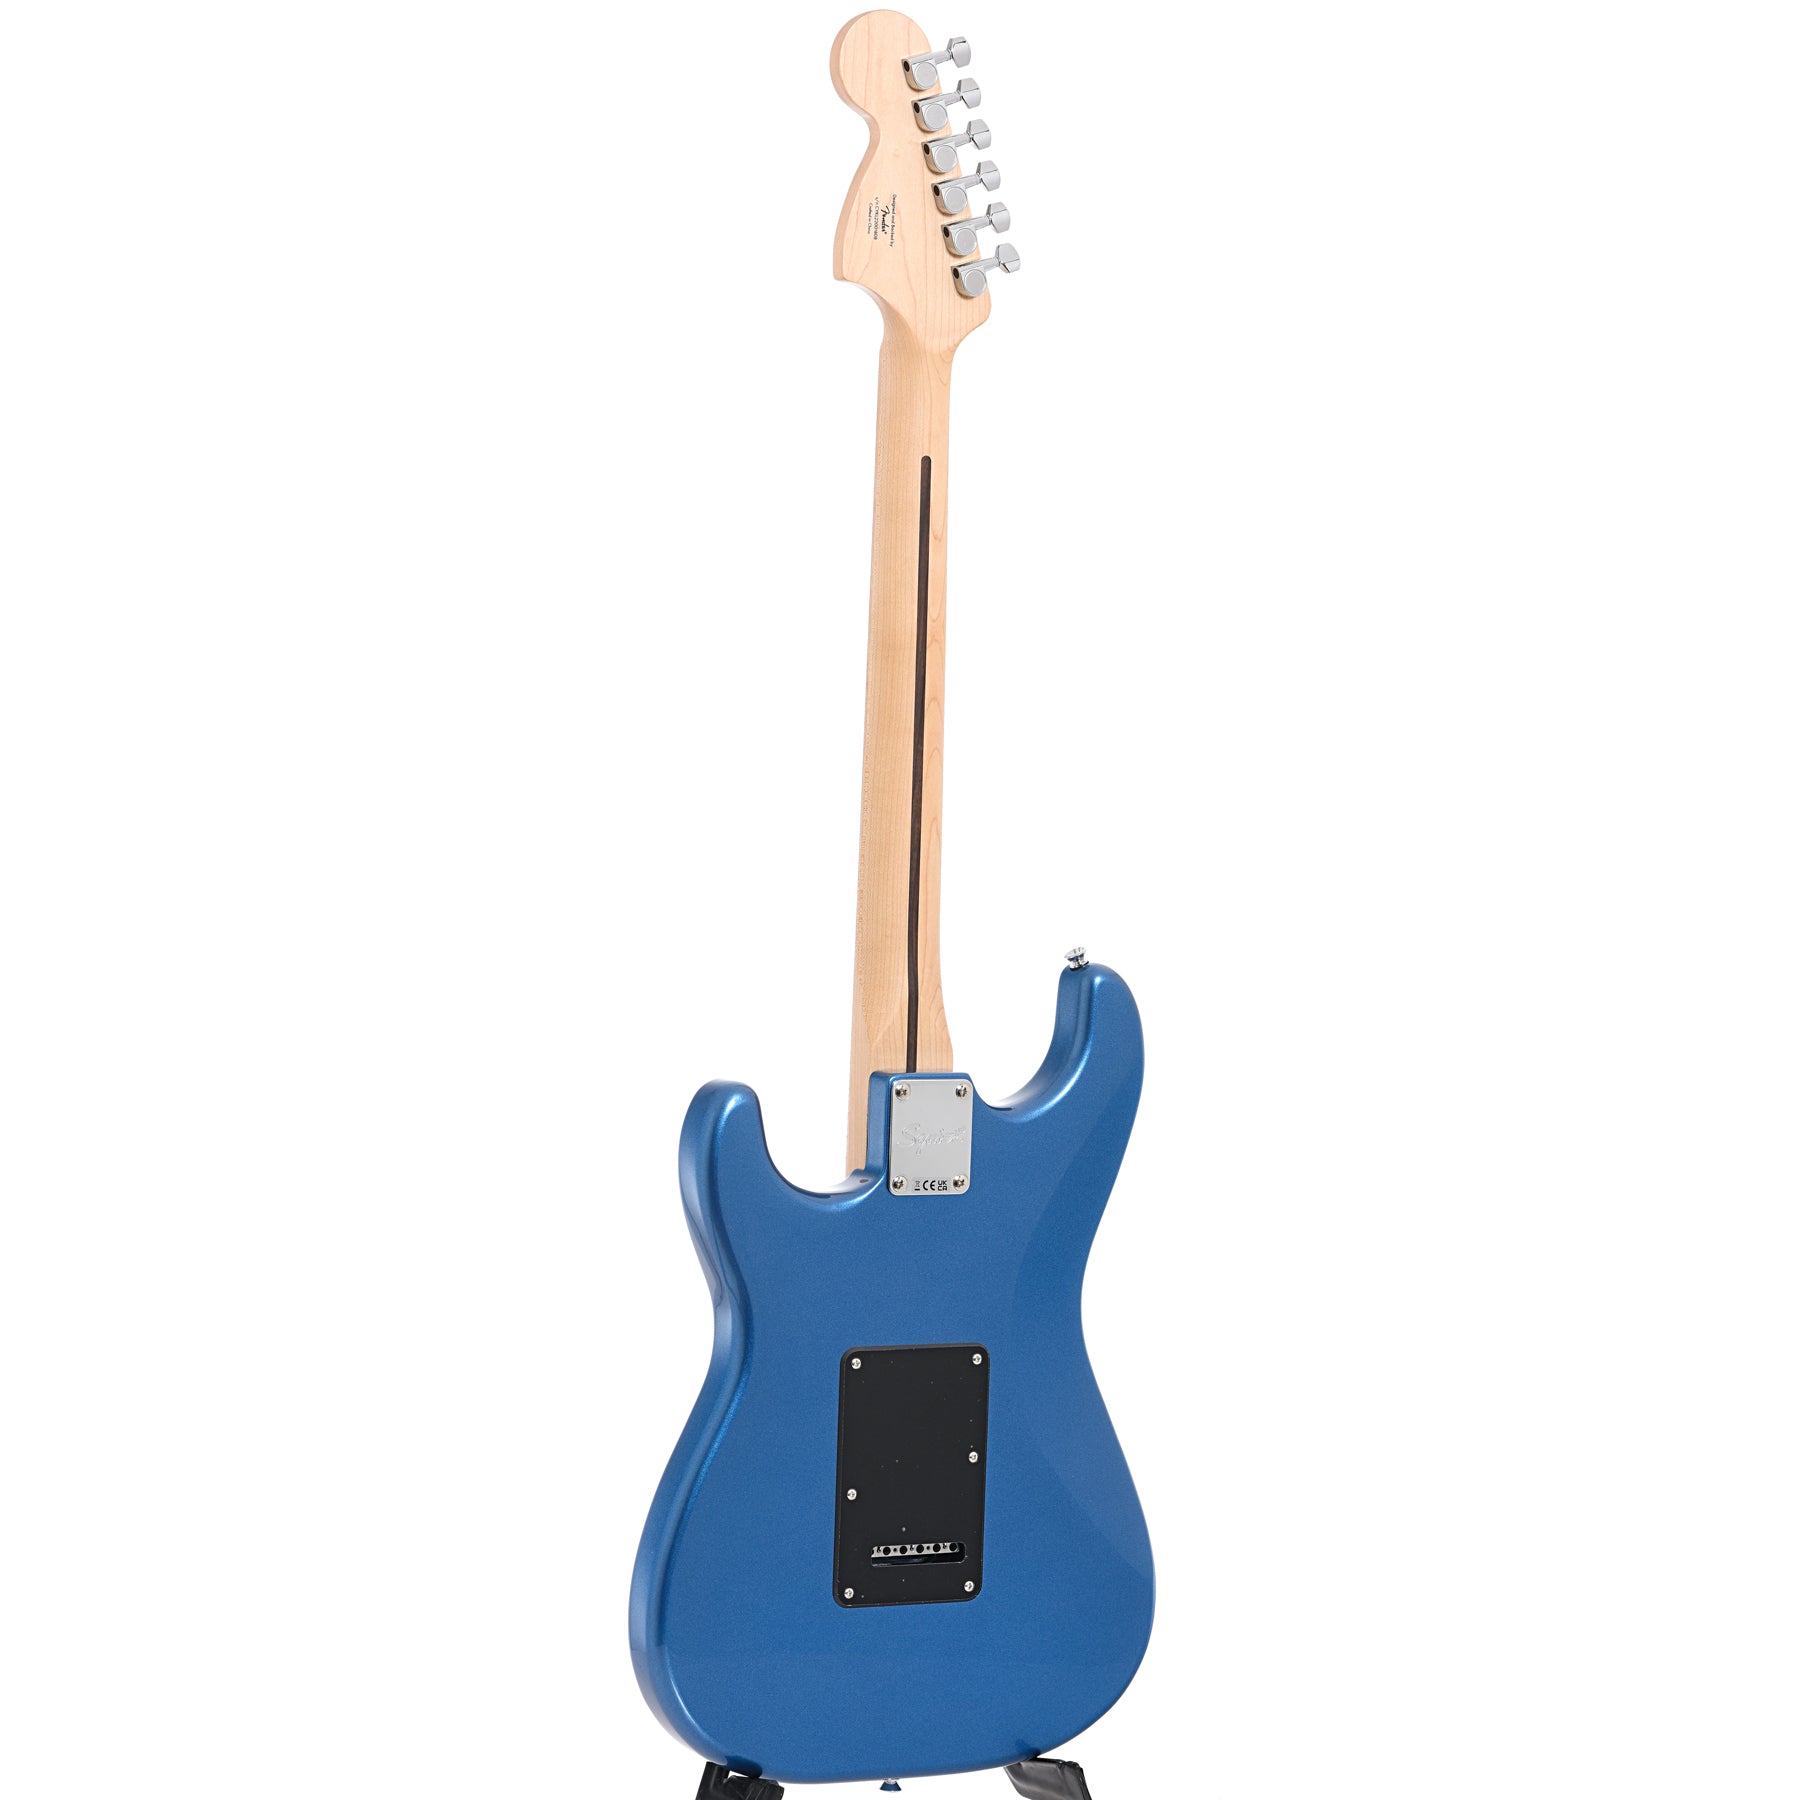 Full back and side of Squier Affinity Series Stratocaster, Lake Placid Blue